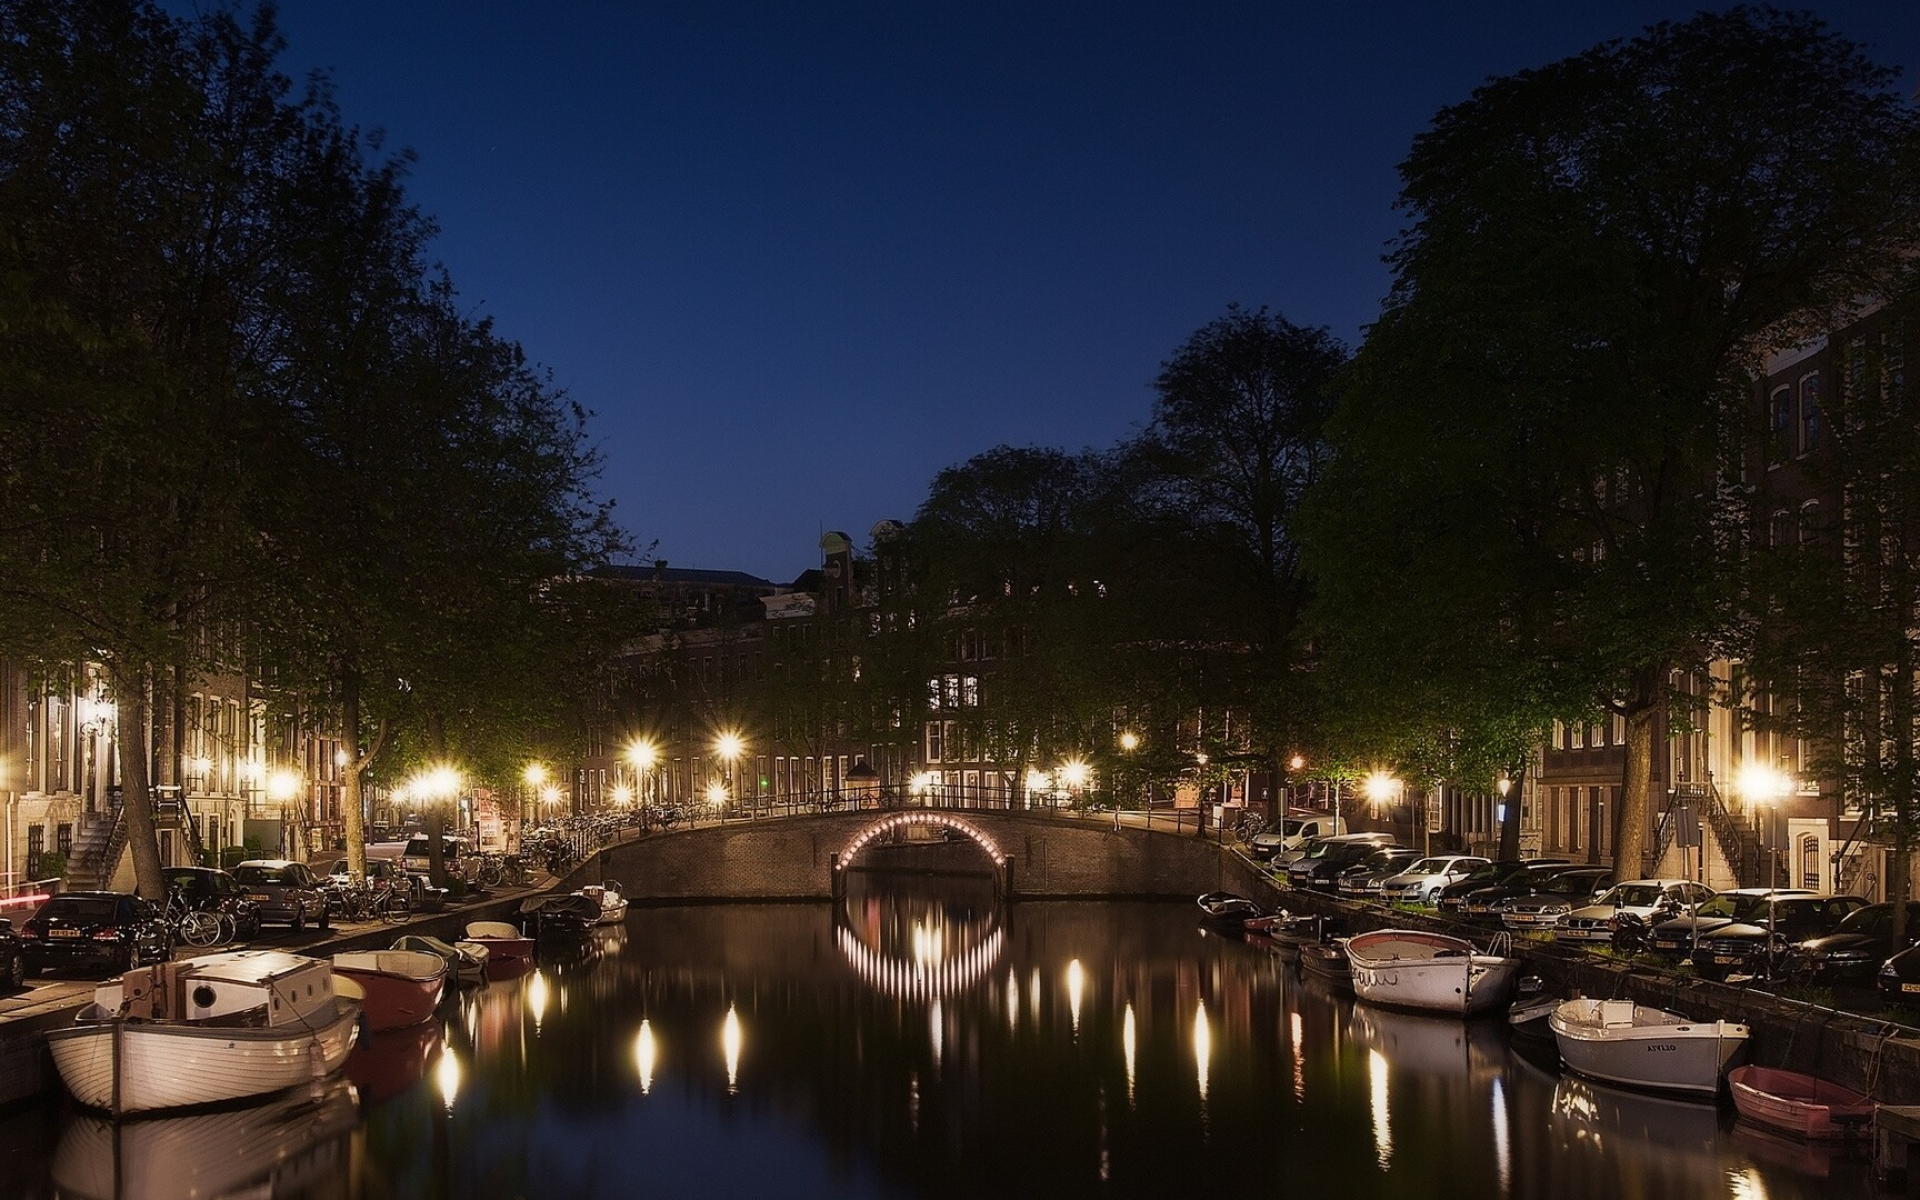 Netherlands: Amsterdam, Known for the canals that cross the city, North Holland. 1920x1200 HD Wallpaper.